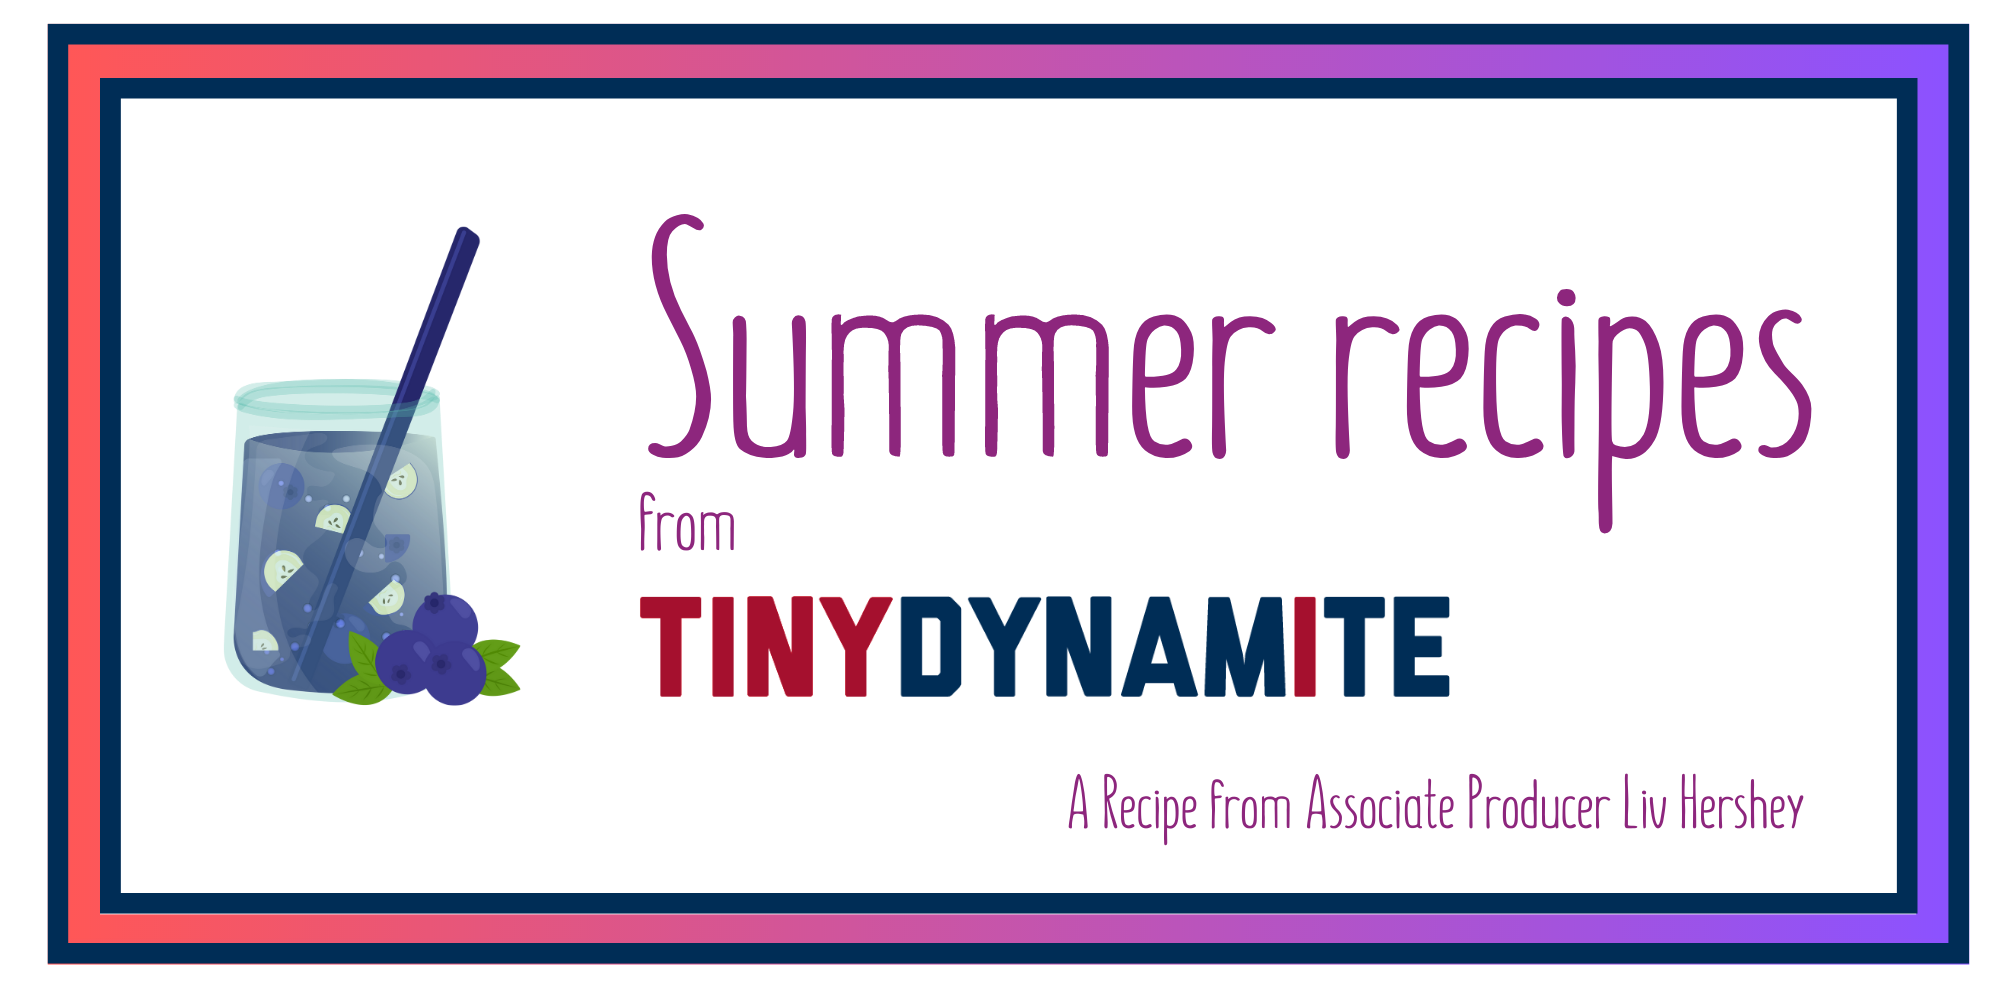 A picture of a blueberry cocktail and the text "Summer recipes from Tiny Dynamite - A recipe from Associate Producer Liv Hershey"